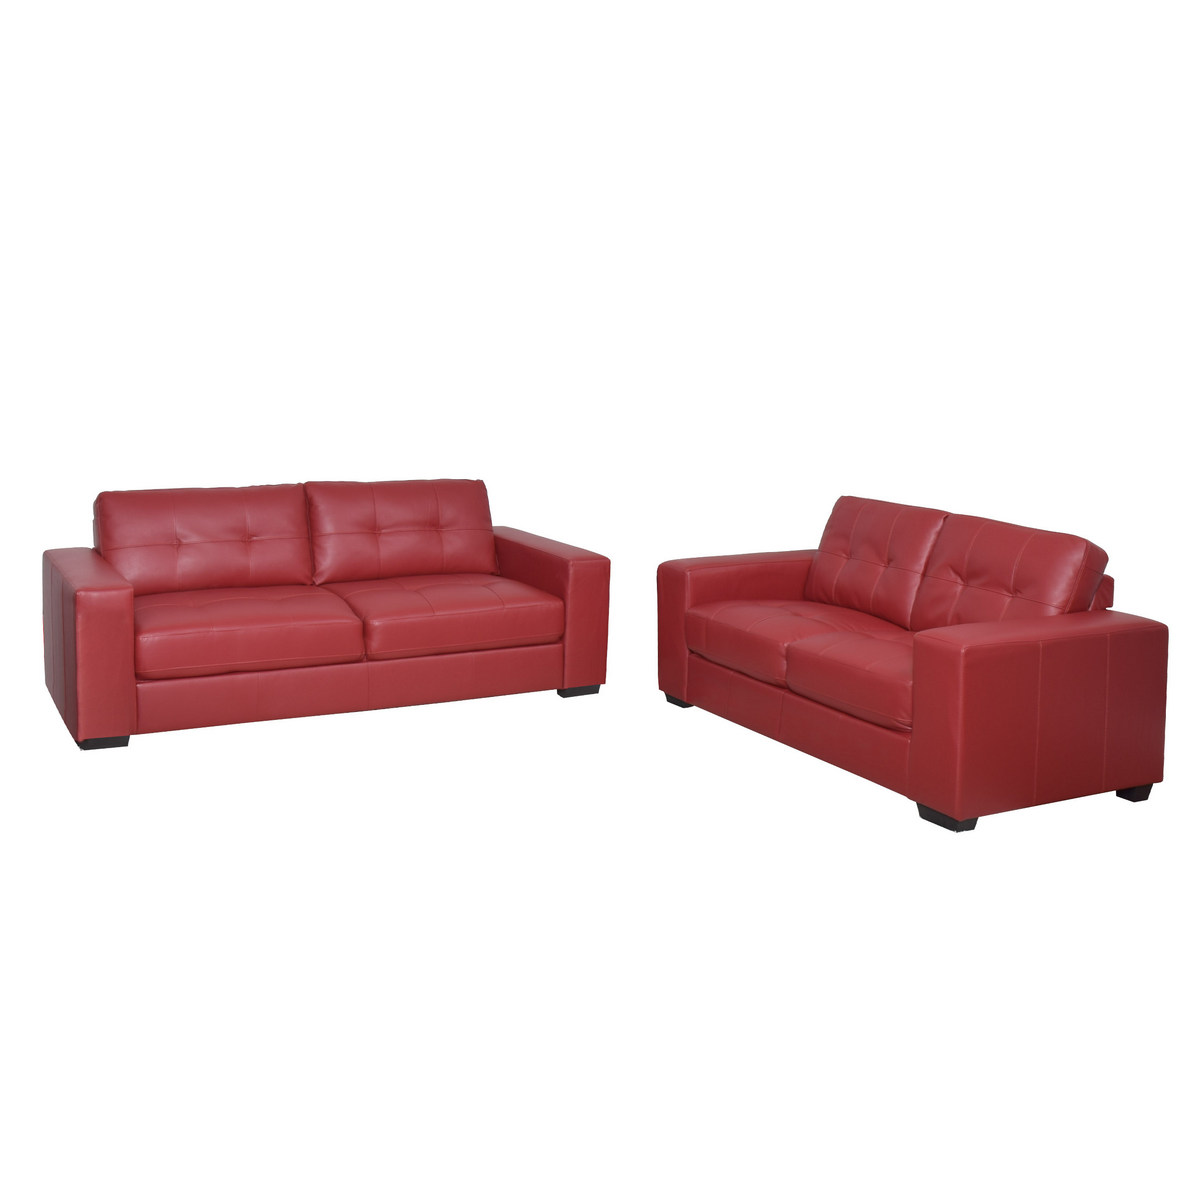 Tufted Red Bonded Leather Sofa Set